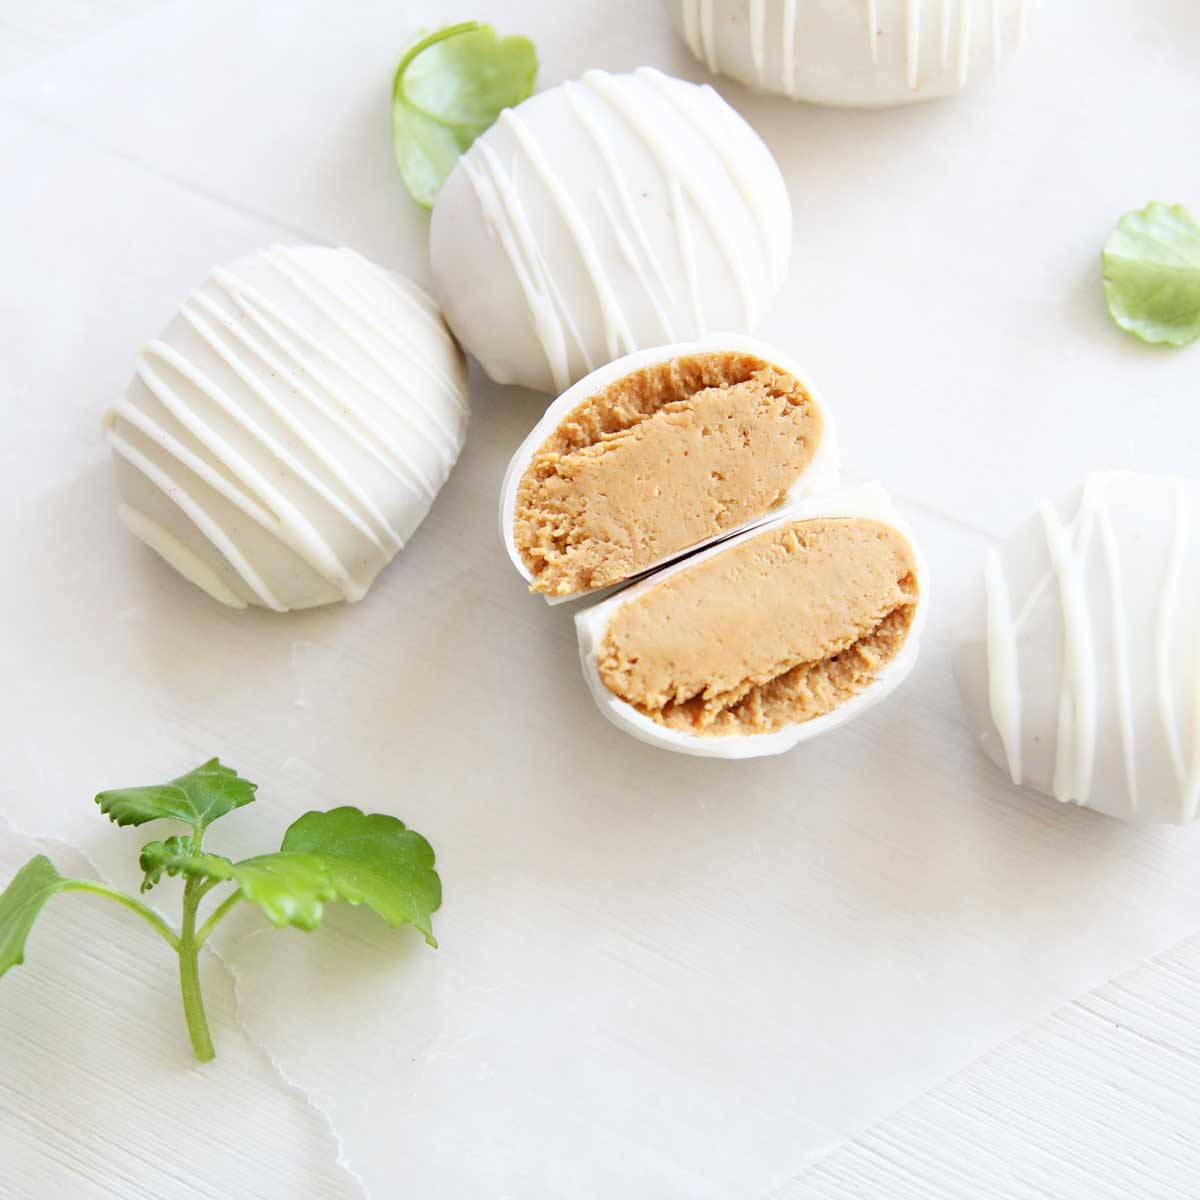 Easy Greek Yogurt & Peanut Butter Easter Eggs with White Chocolate - Walnut Butter Mooncakes